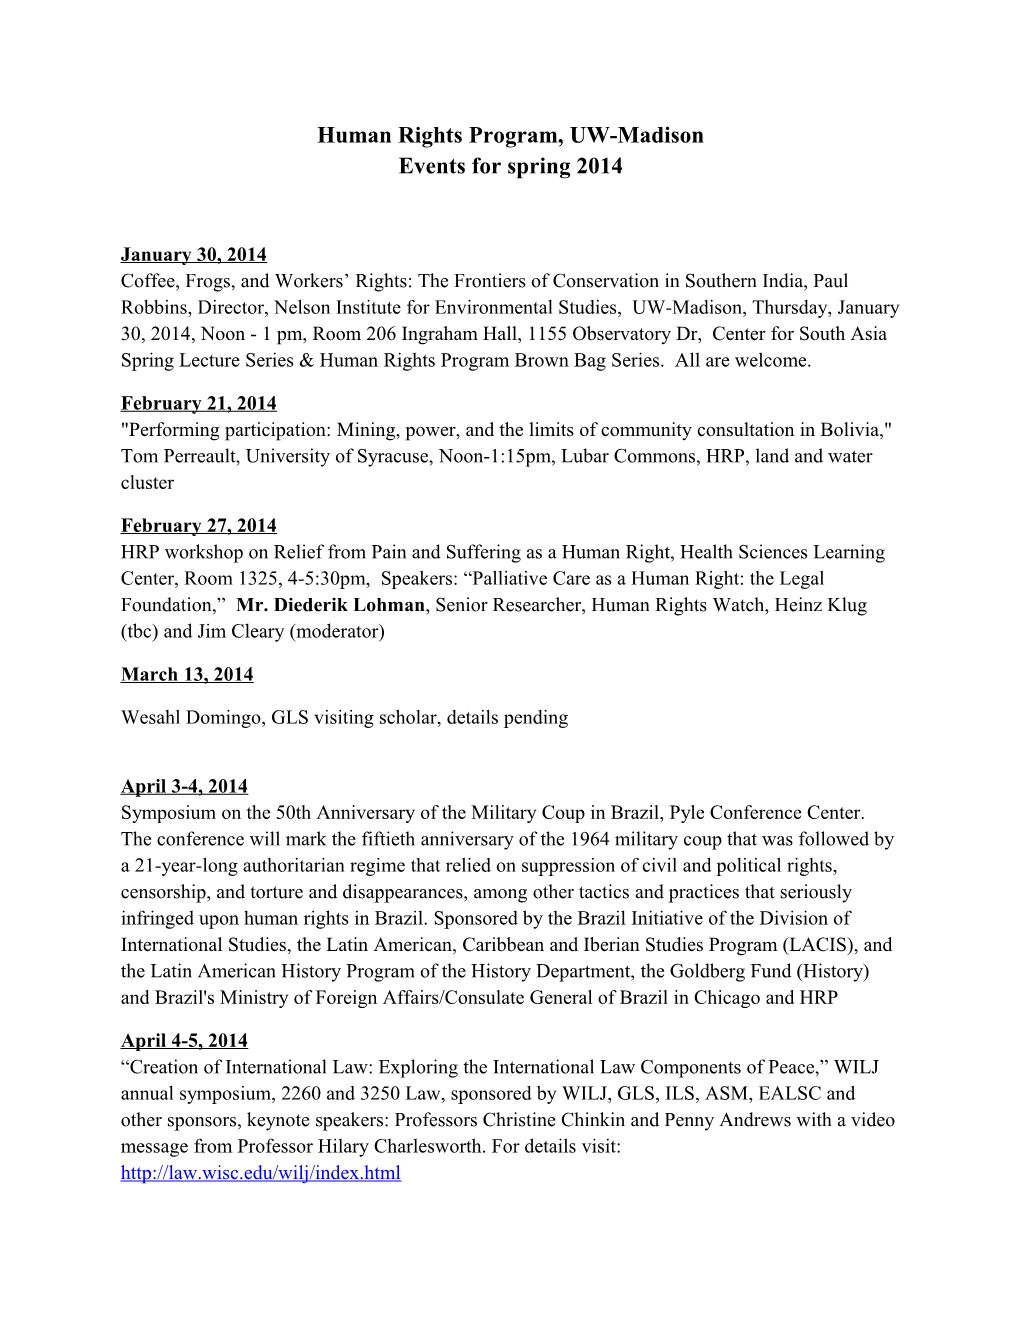 Human Rights Program, UW-Madison Events for Spring 2014